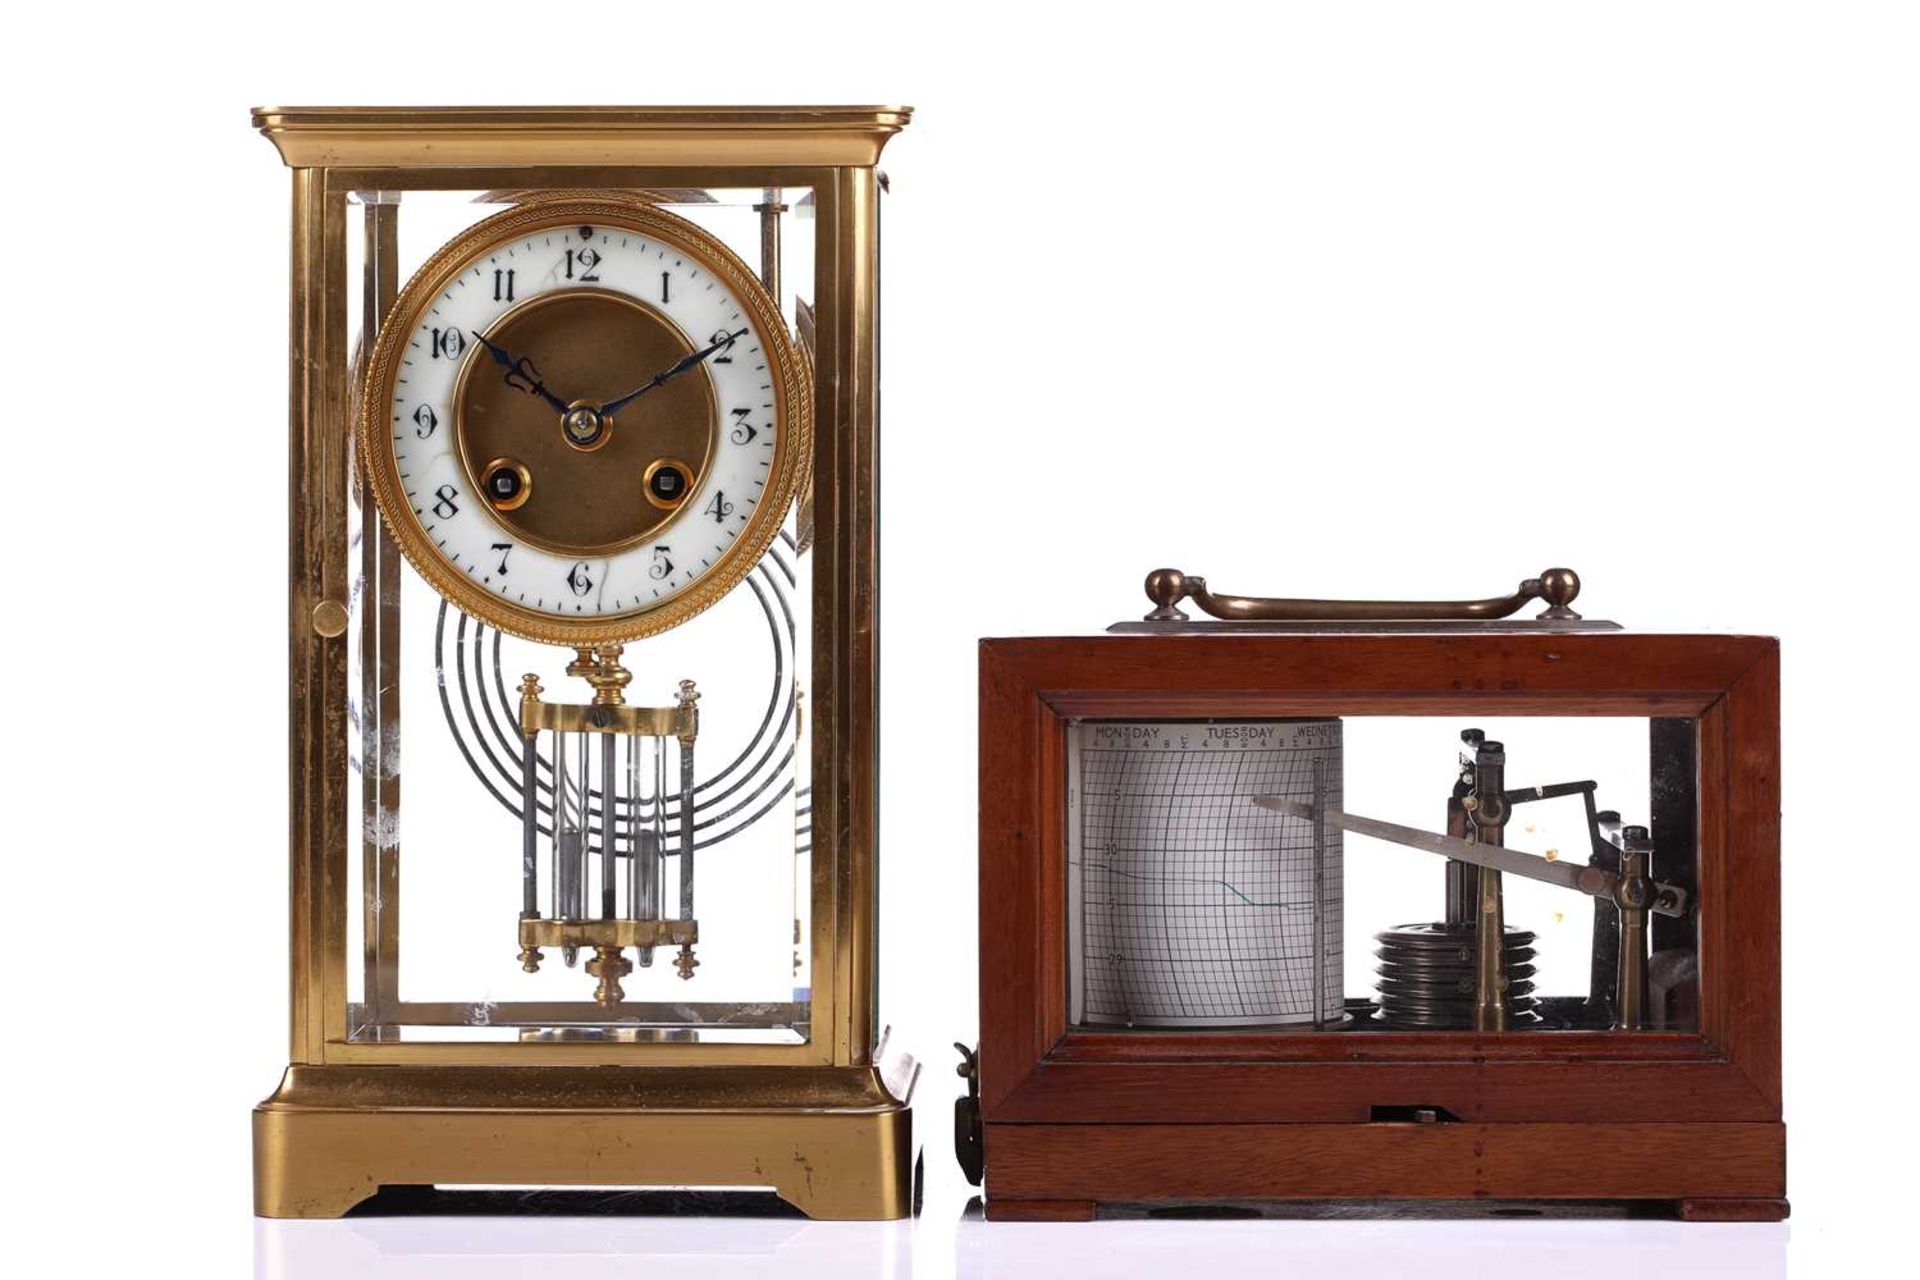 An early 20th-century French "four-glass" mantle clock in a simple gilt brass ogee case, the 8-day